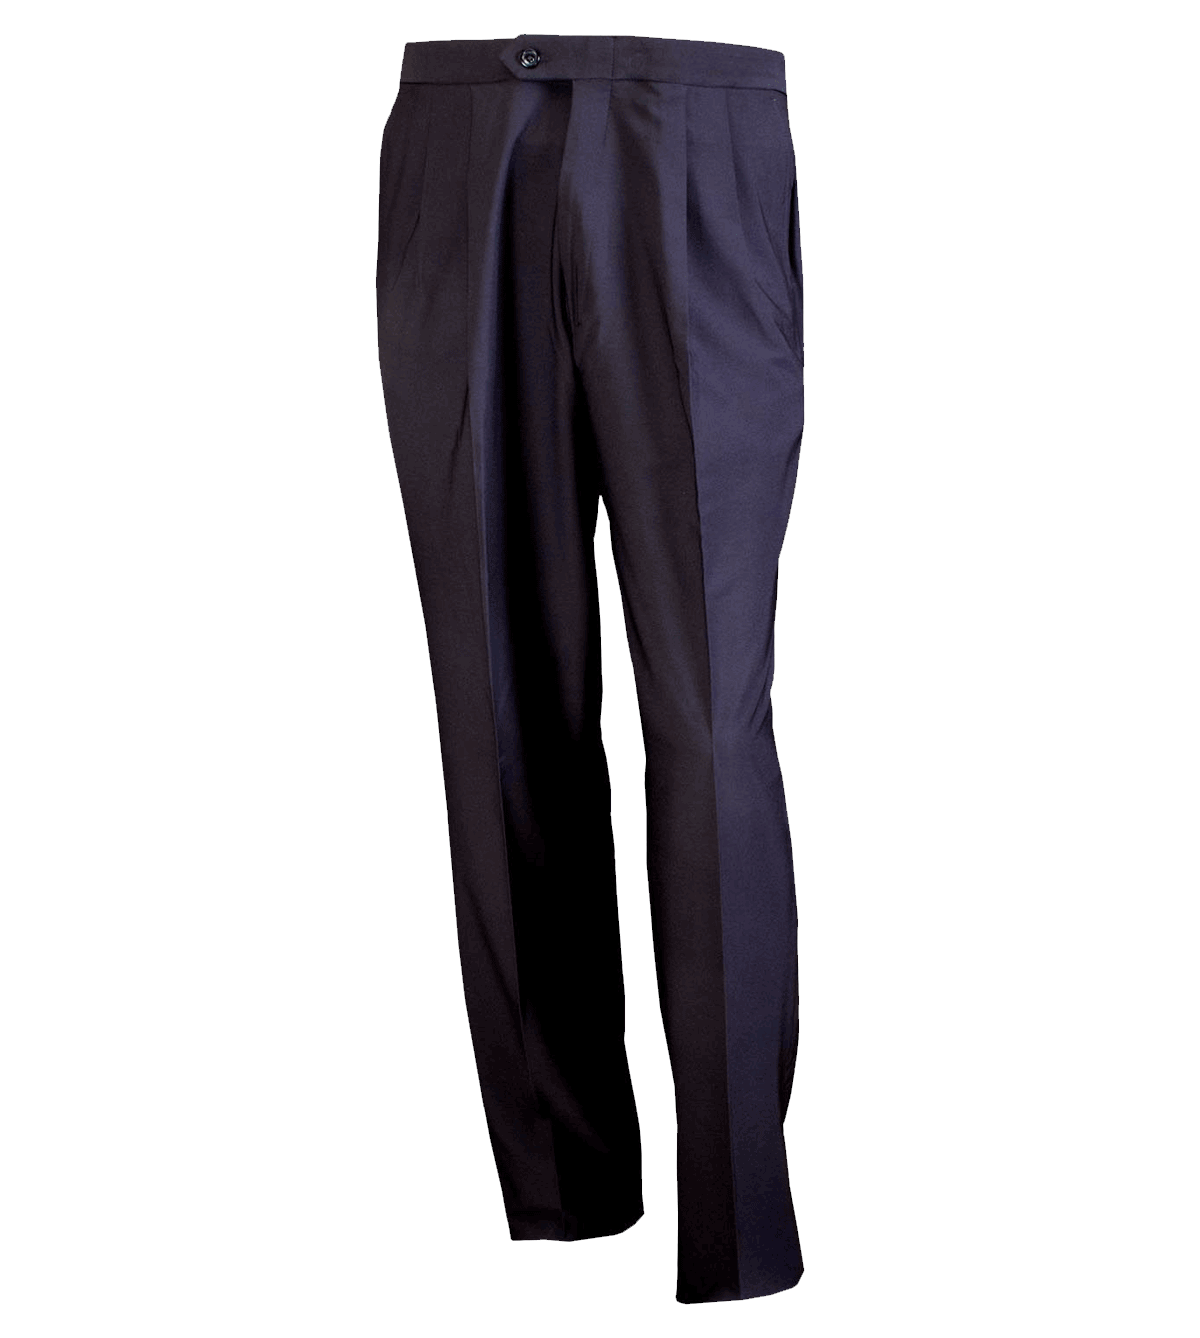 HONIG'S 4-Way Stretch Pleated Pant